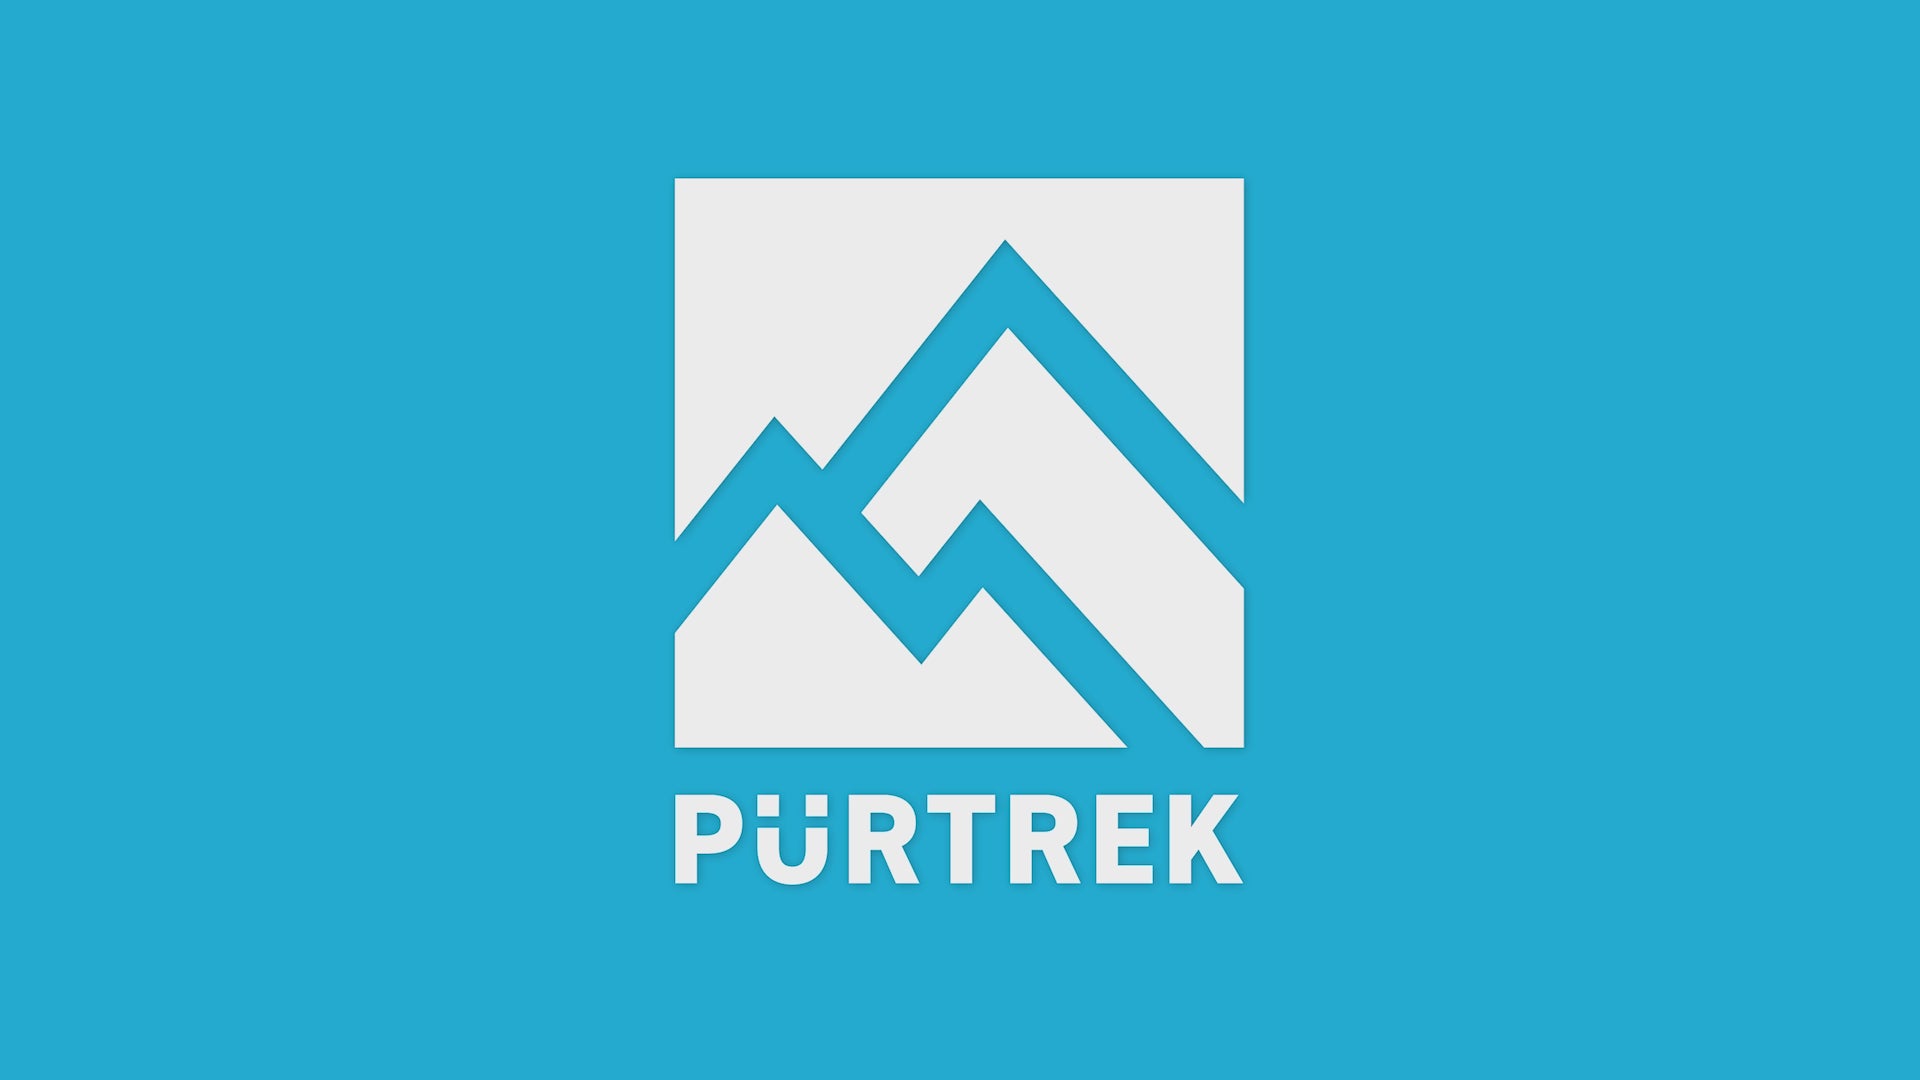 Inventor/Founder of PurTrek personally demos the product for you. Couldn't be easier or better…